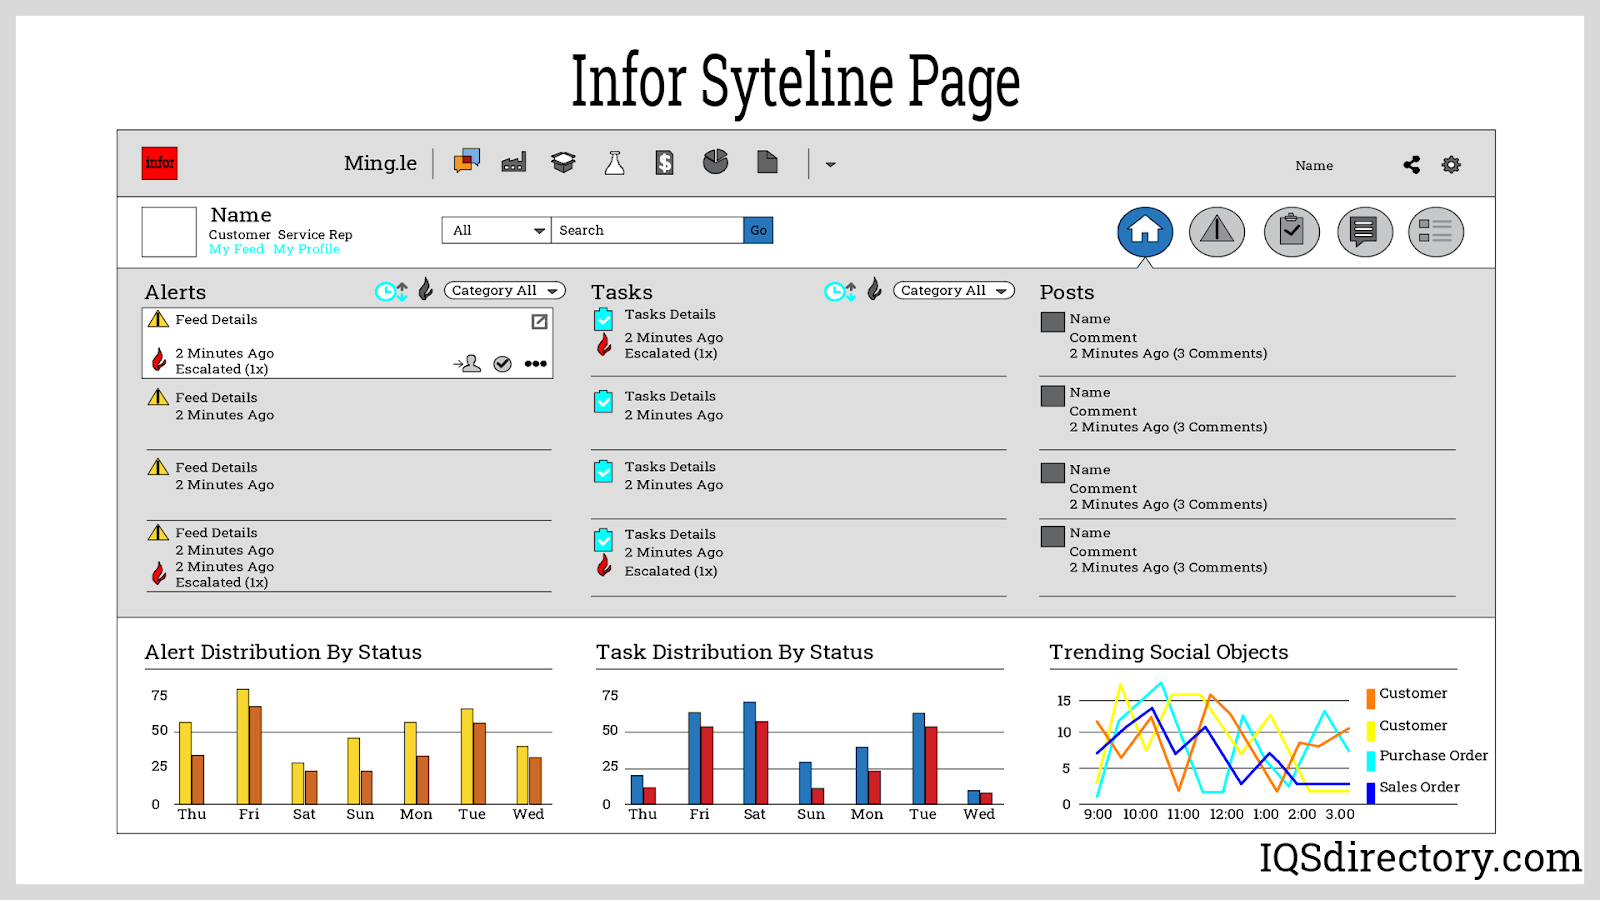 Infor Syteline Page